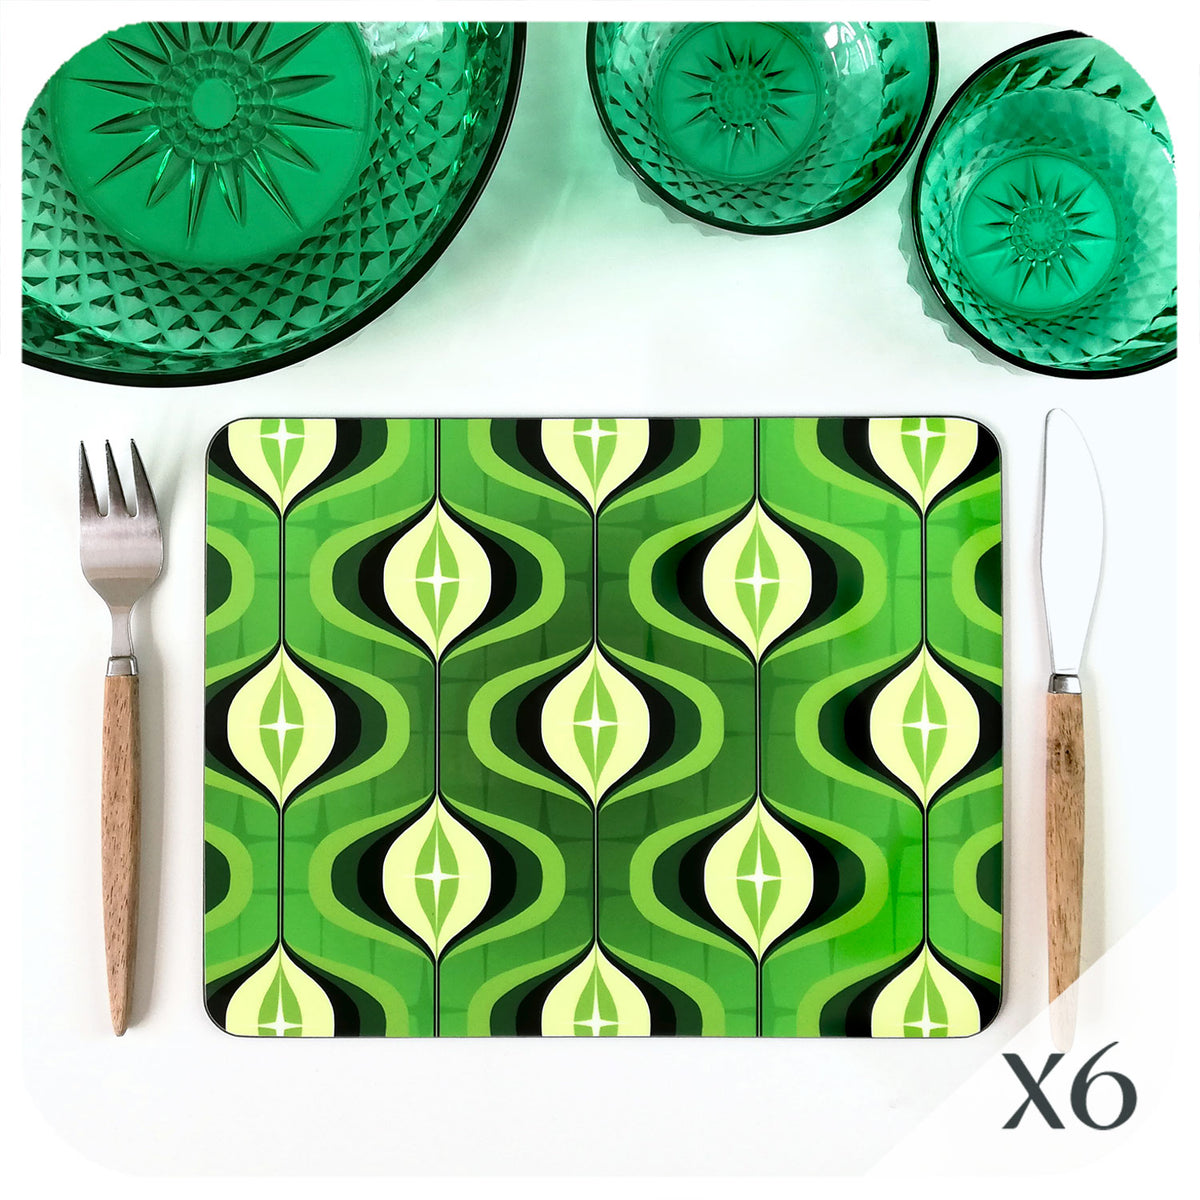 1970s Op Art Placemats in green, set of 6 | The Inkabilly Emporium